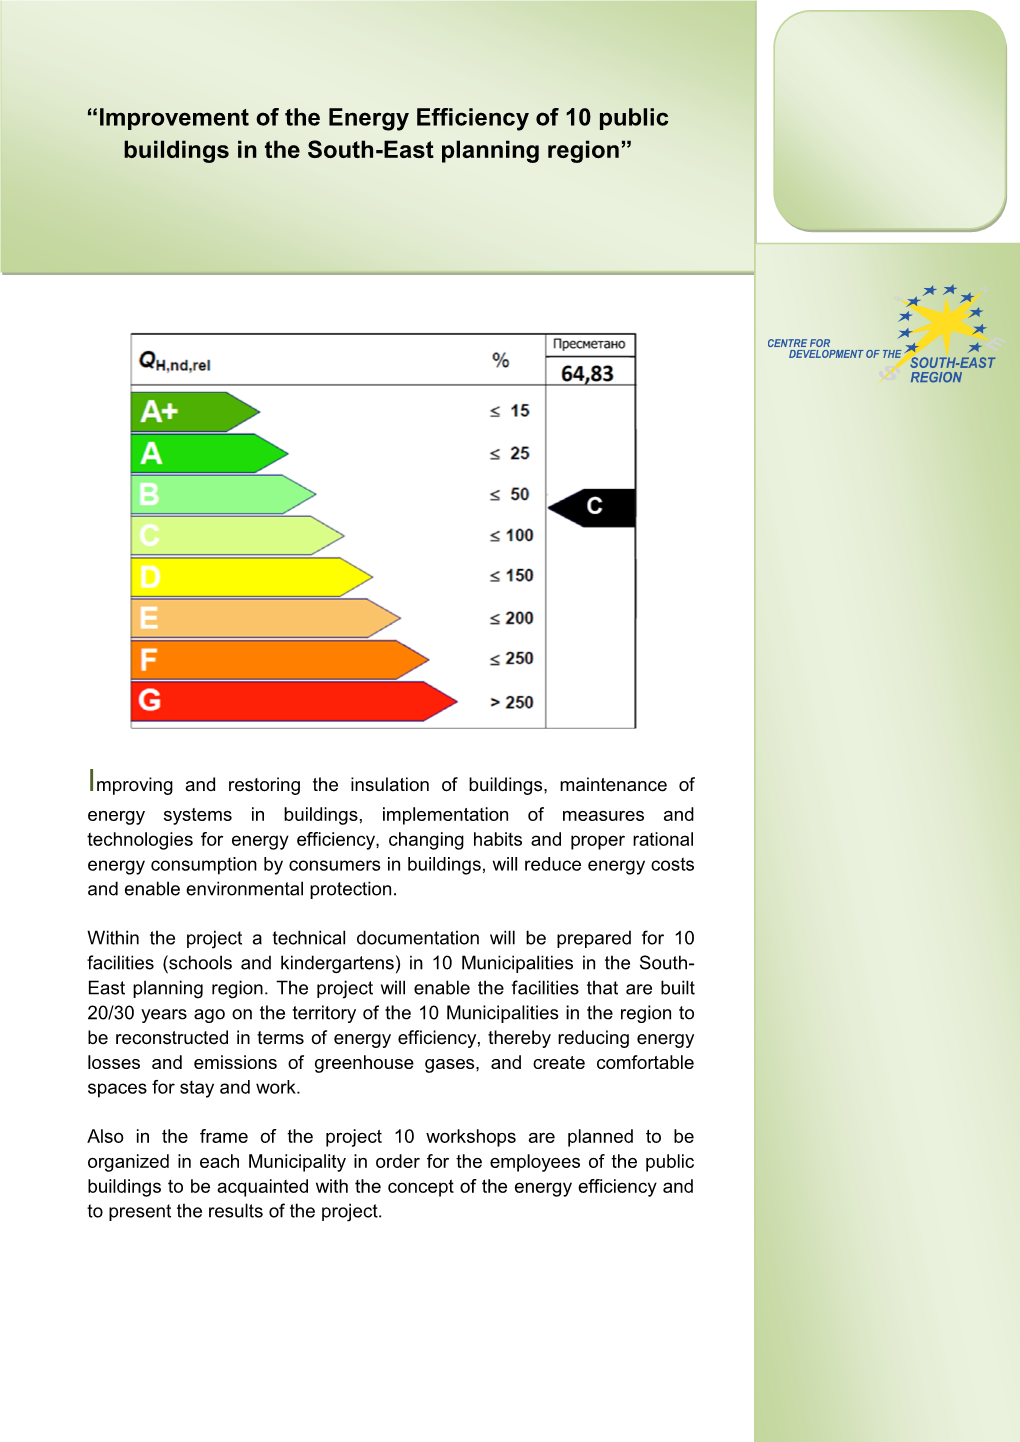 “Improvement of the Energy Efficiency of 10 Public Buildings in the South-East Planning Region”